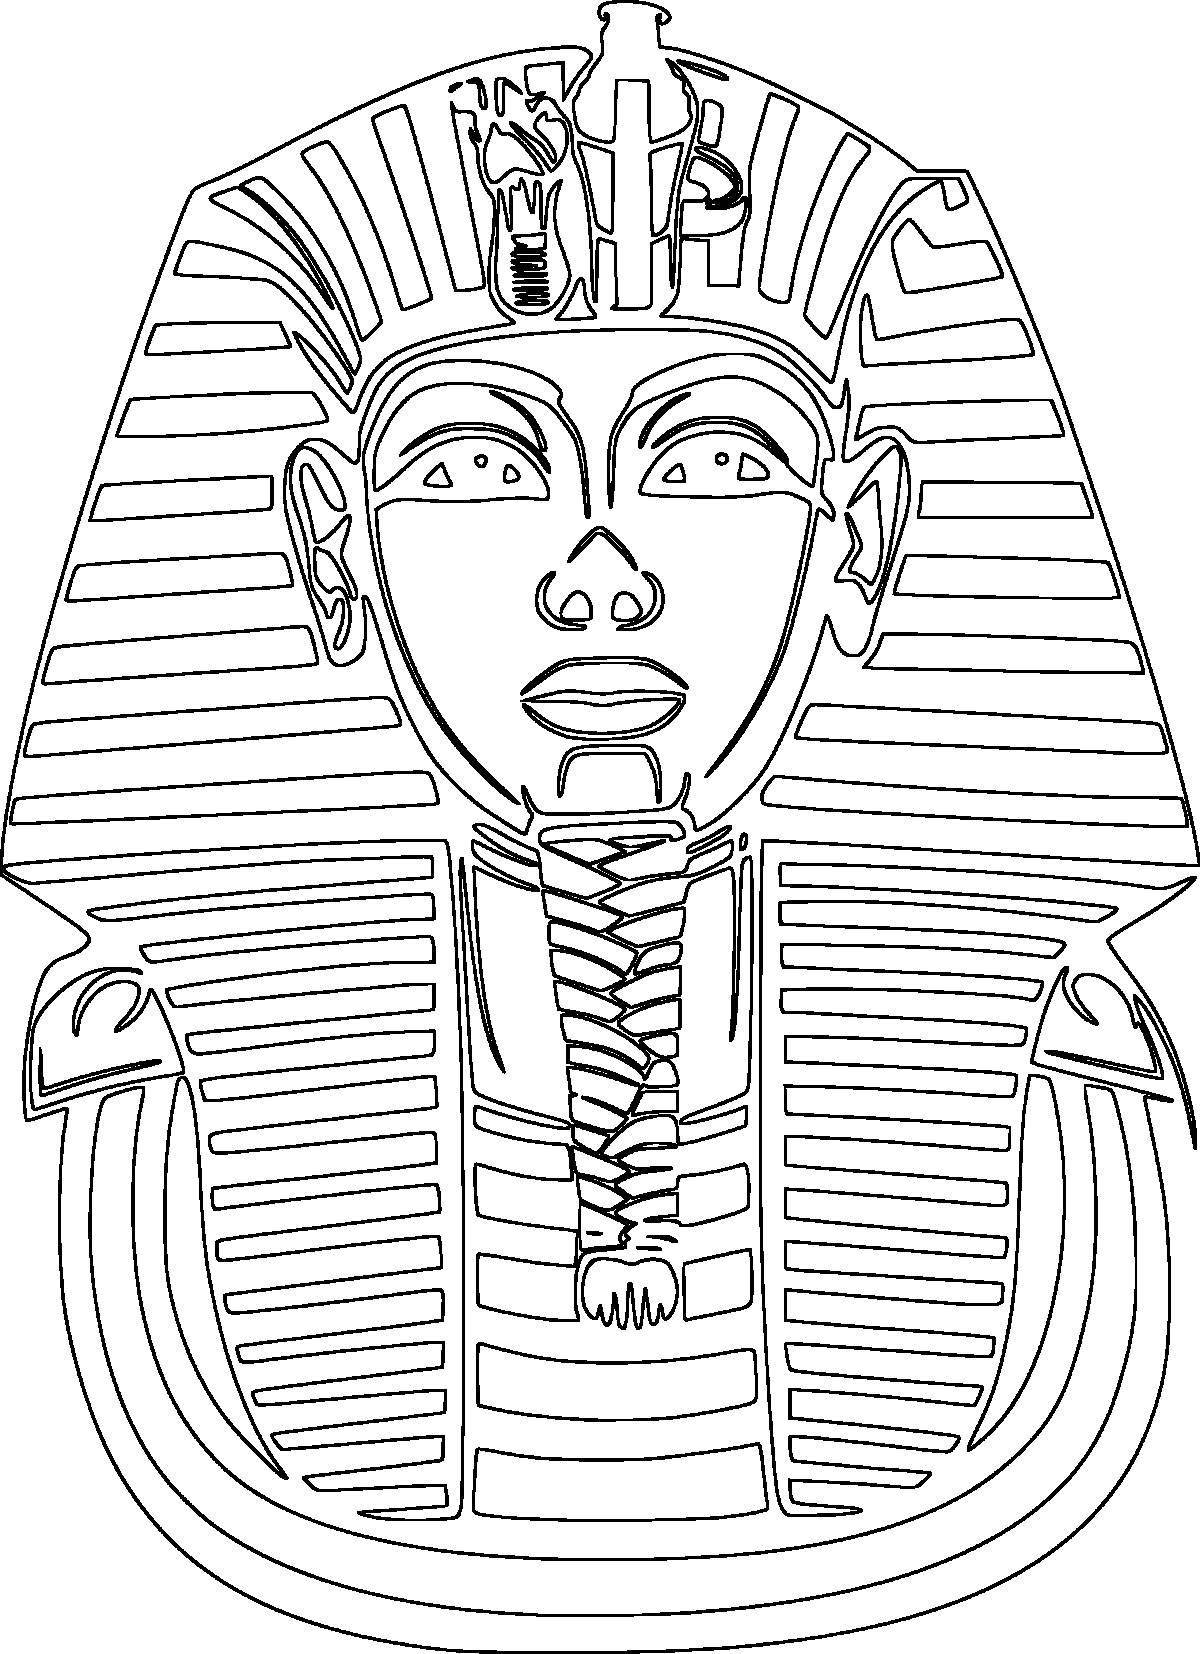 Coloring mask of the great pharaoh